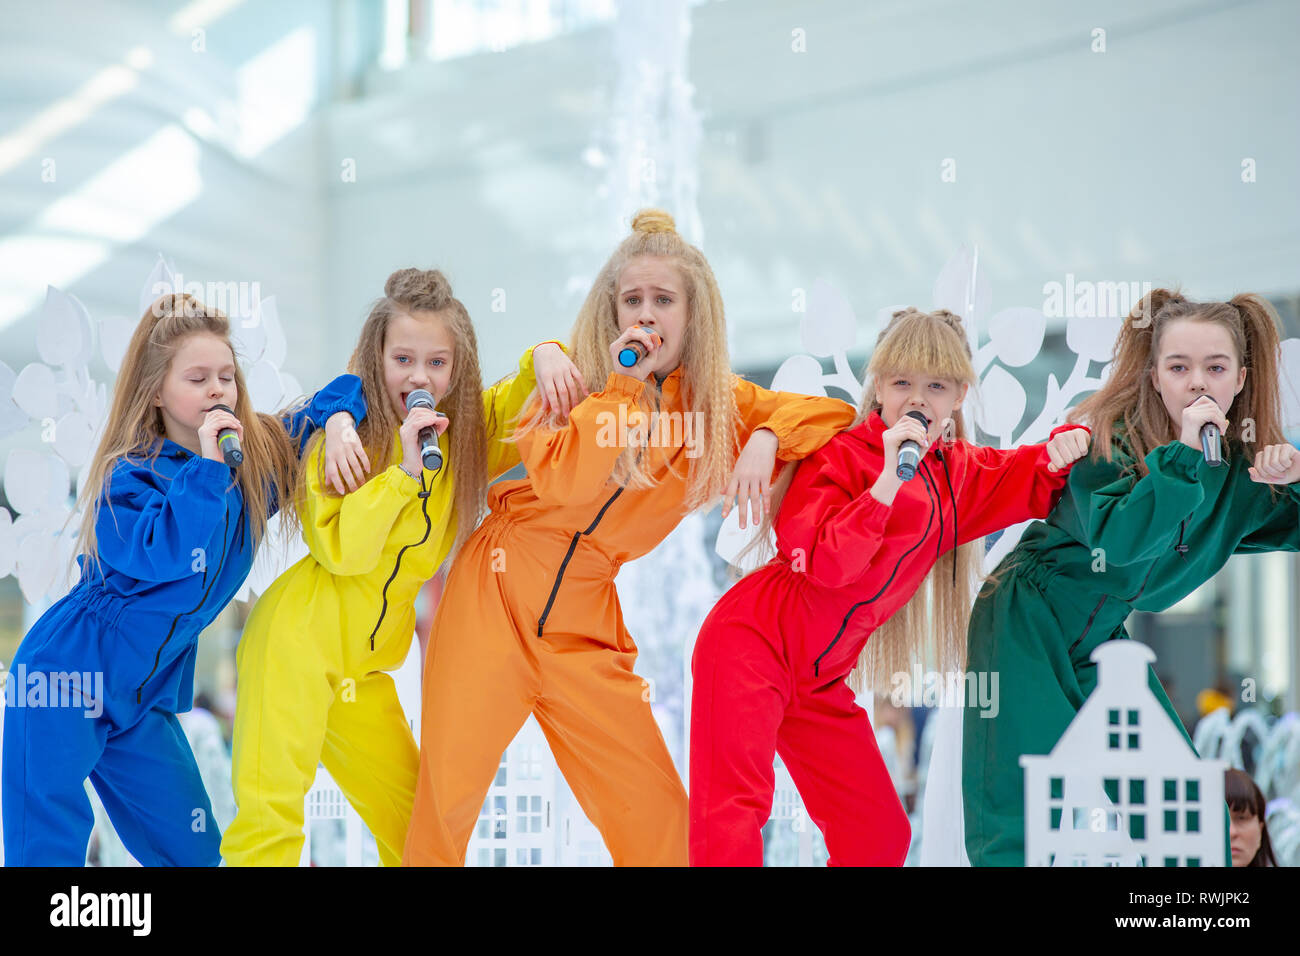 Kyiv, Ukraine March 03.2019. UKFW. Ukrainian Kids Fashion Day. A group of little girls singing or performing on stage or podium Stock Photo